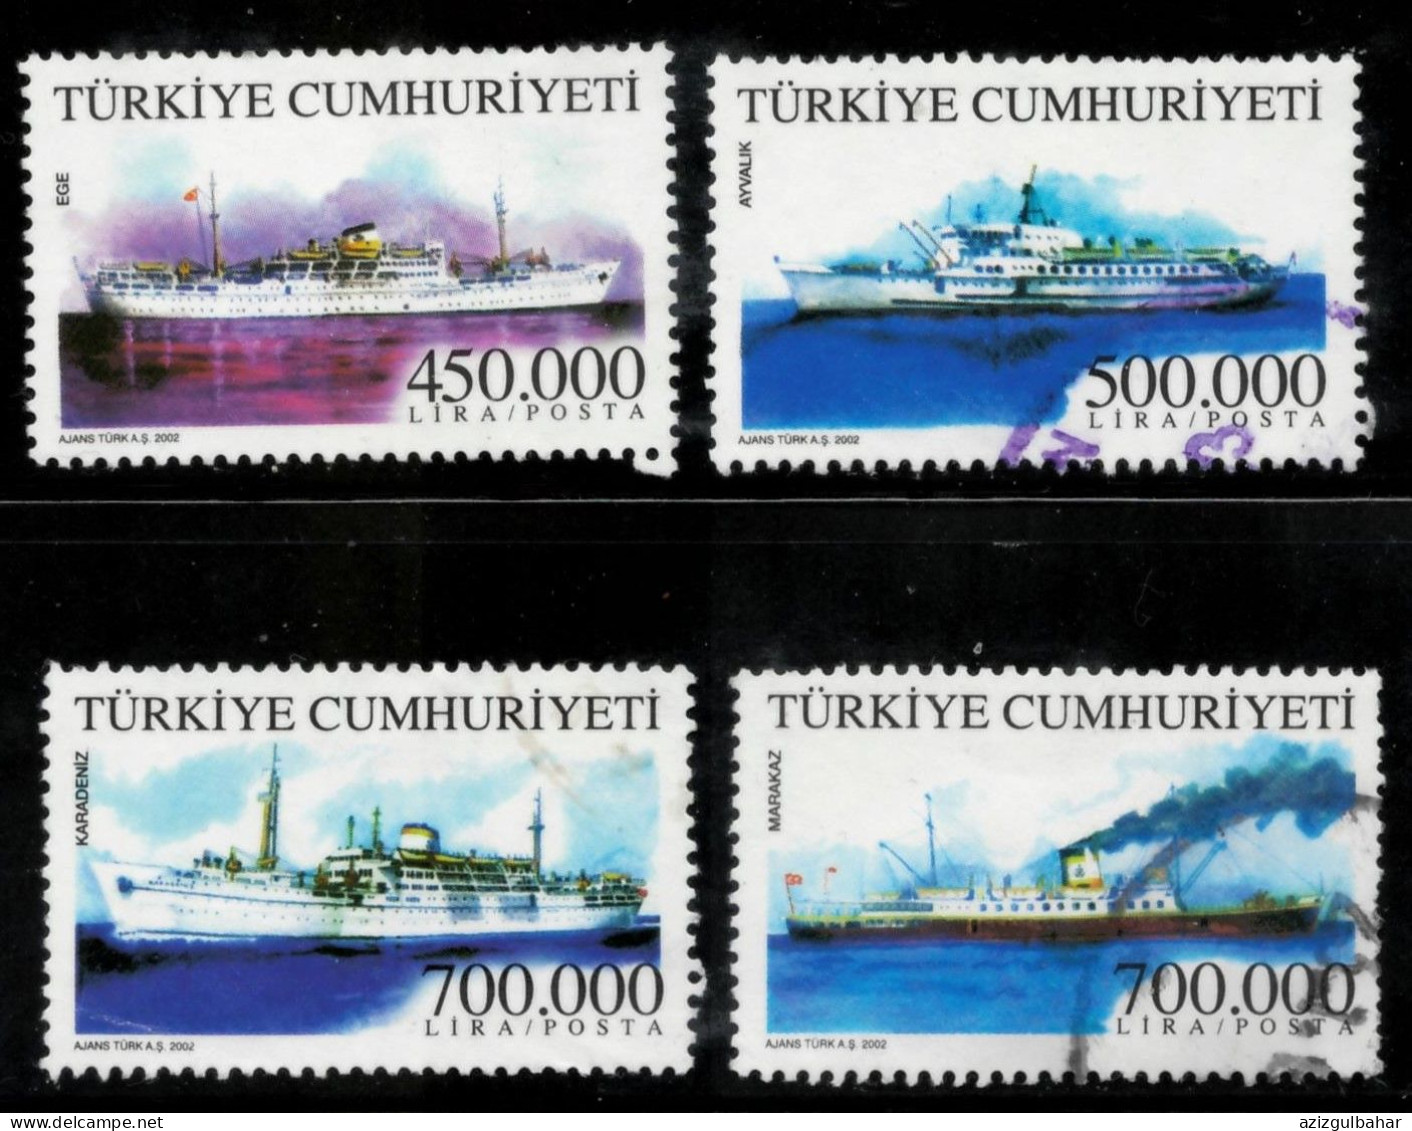 TURKEY 2002 -  USED - TURKISH MERCHANT SHIPS - Used Stamps